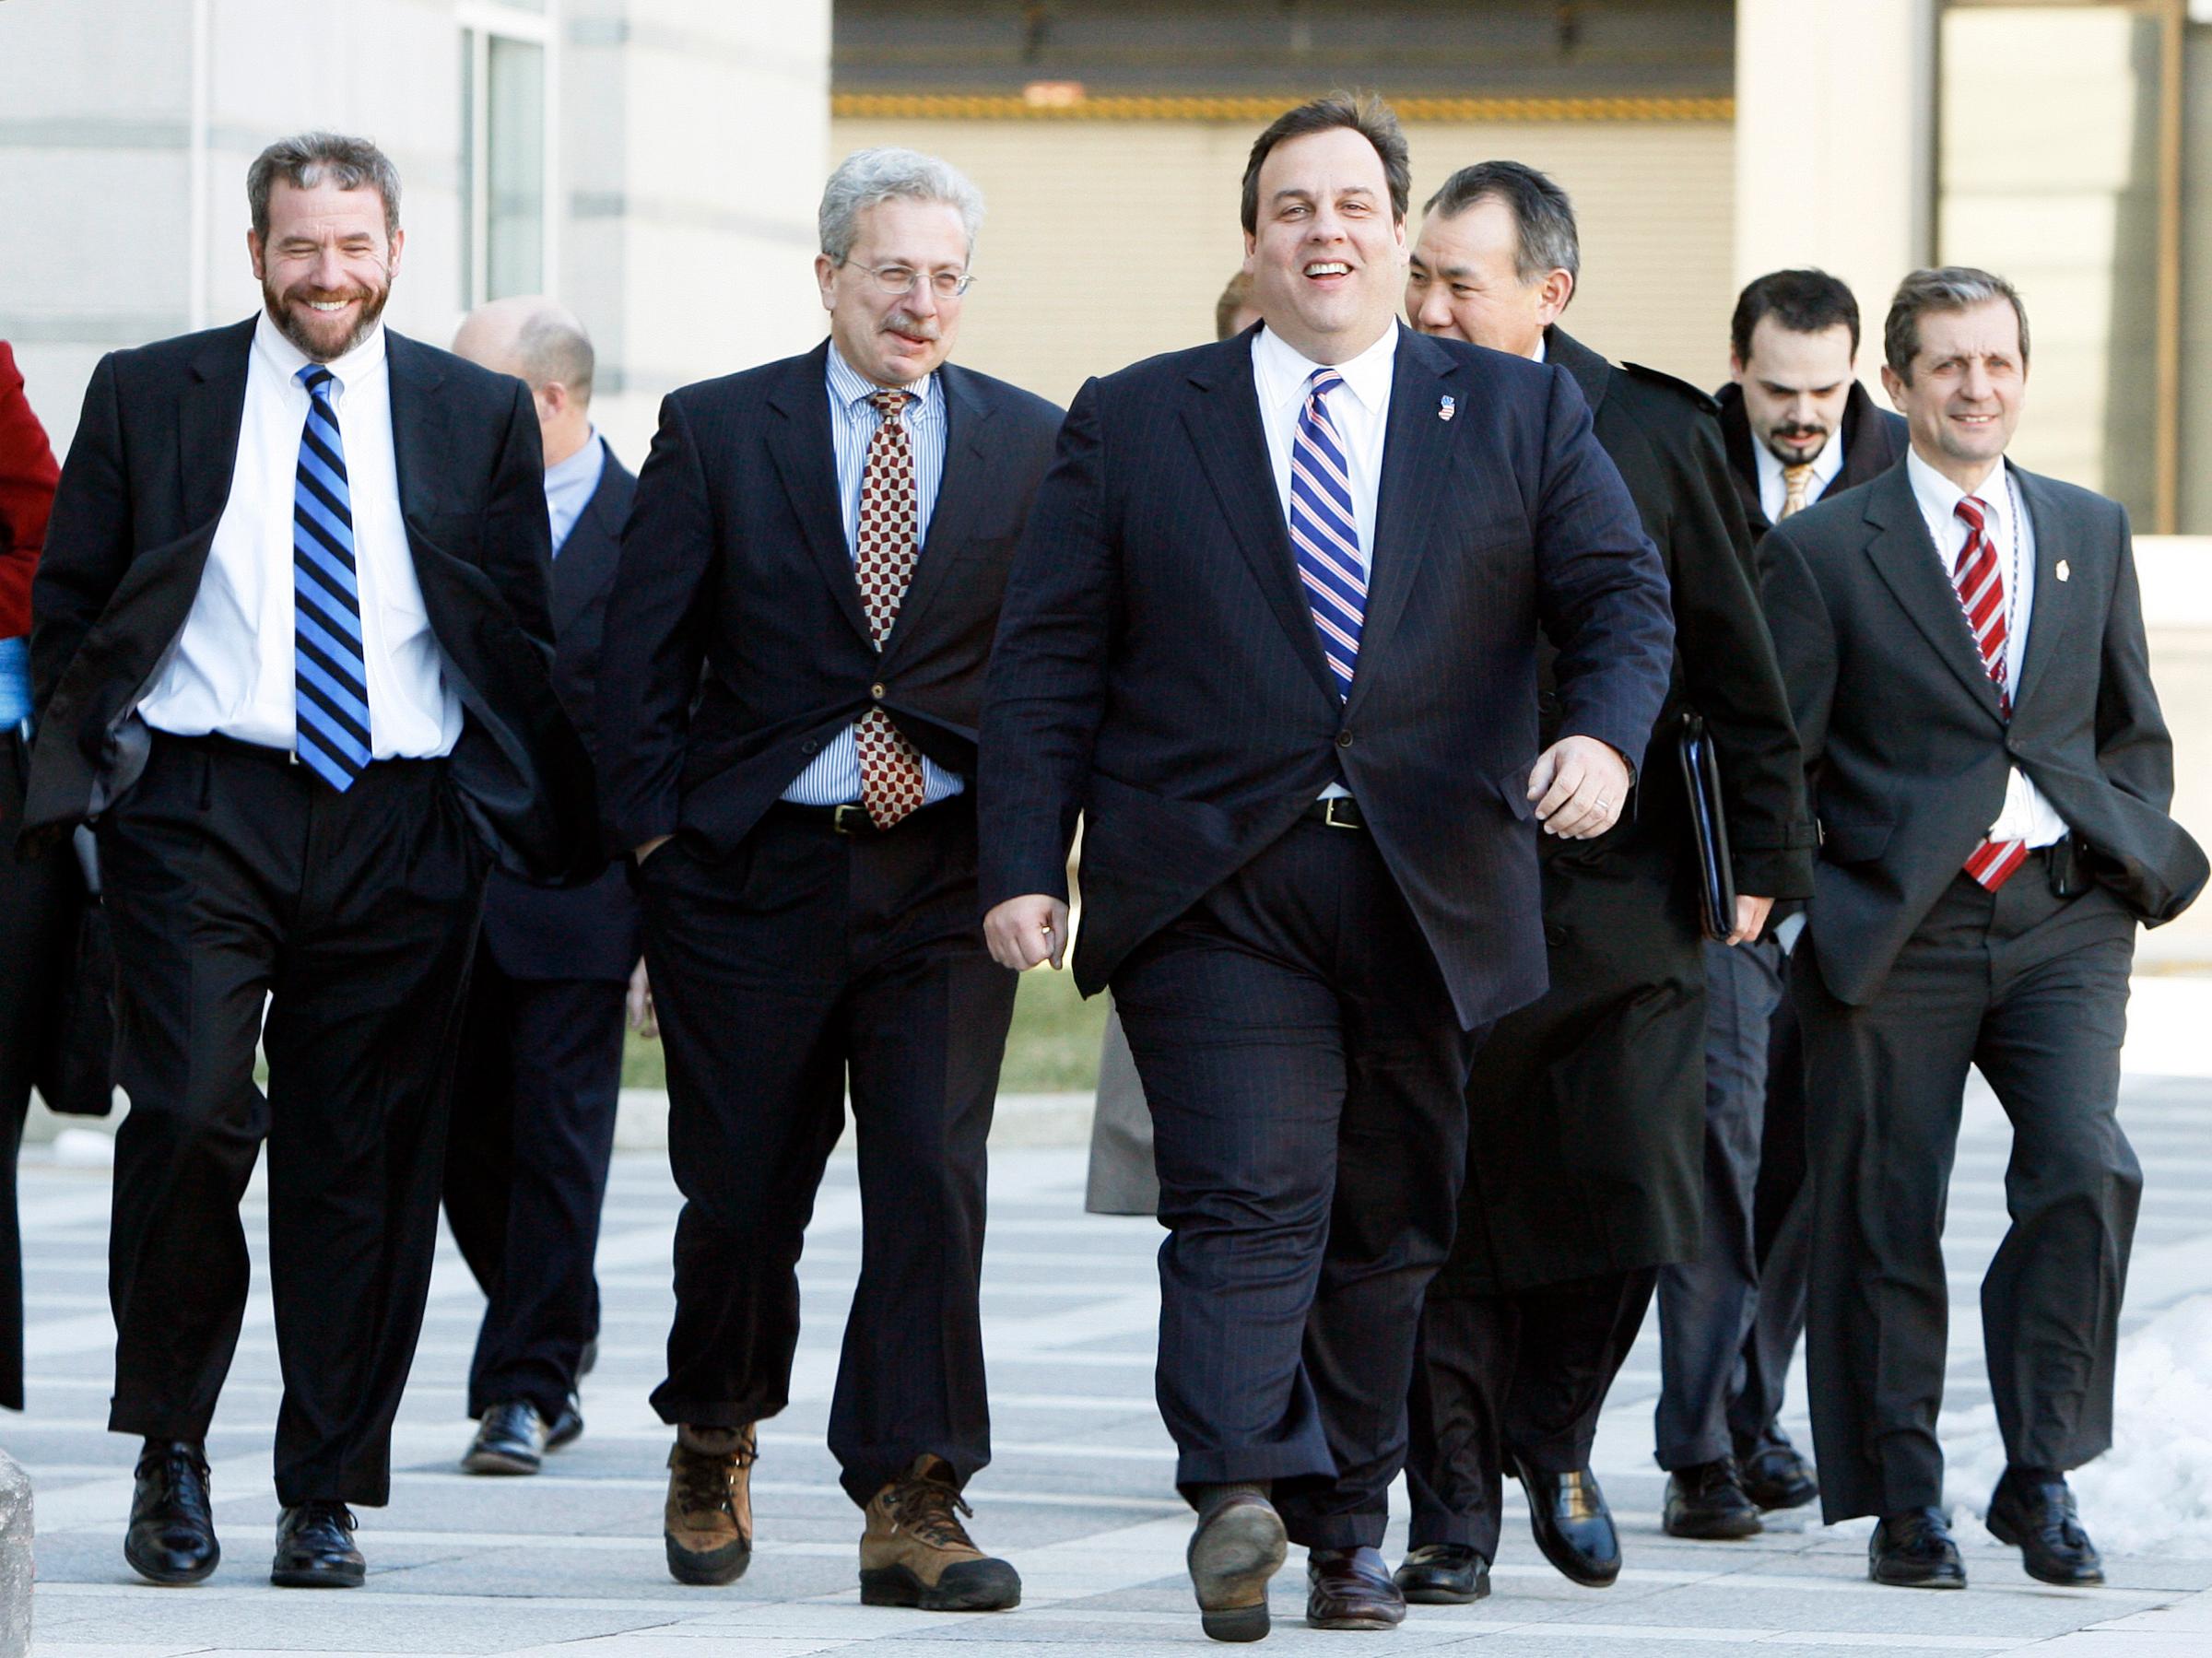 Then-U.S. Attorney Chris Christie heads to a news conference following the indictment of N.J. Senator Joseph Coniglio in Newark, N.J. on Feb. 14, 2008.